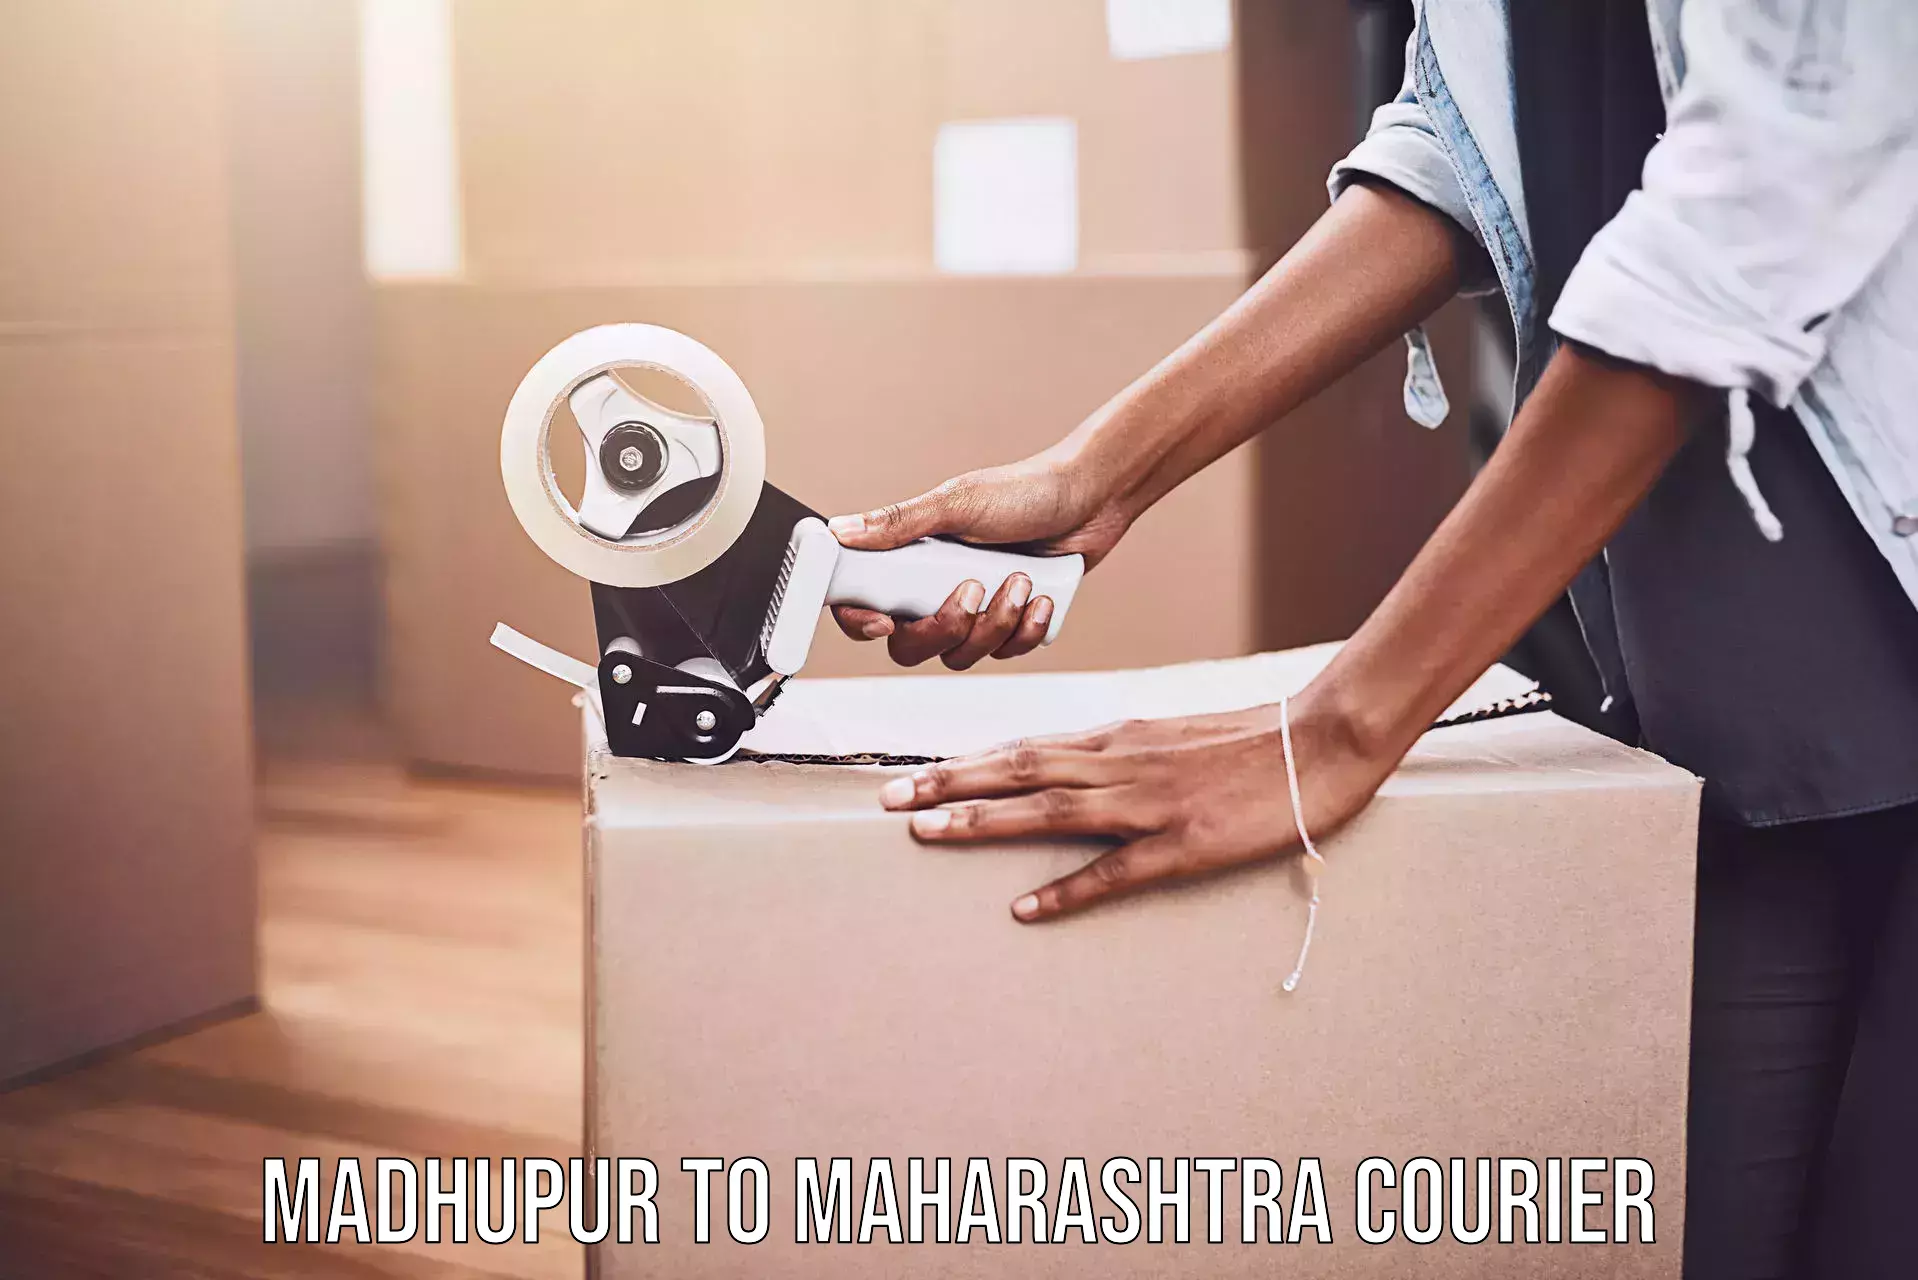 Reliable courier service in Madhupur to Maharashtra